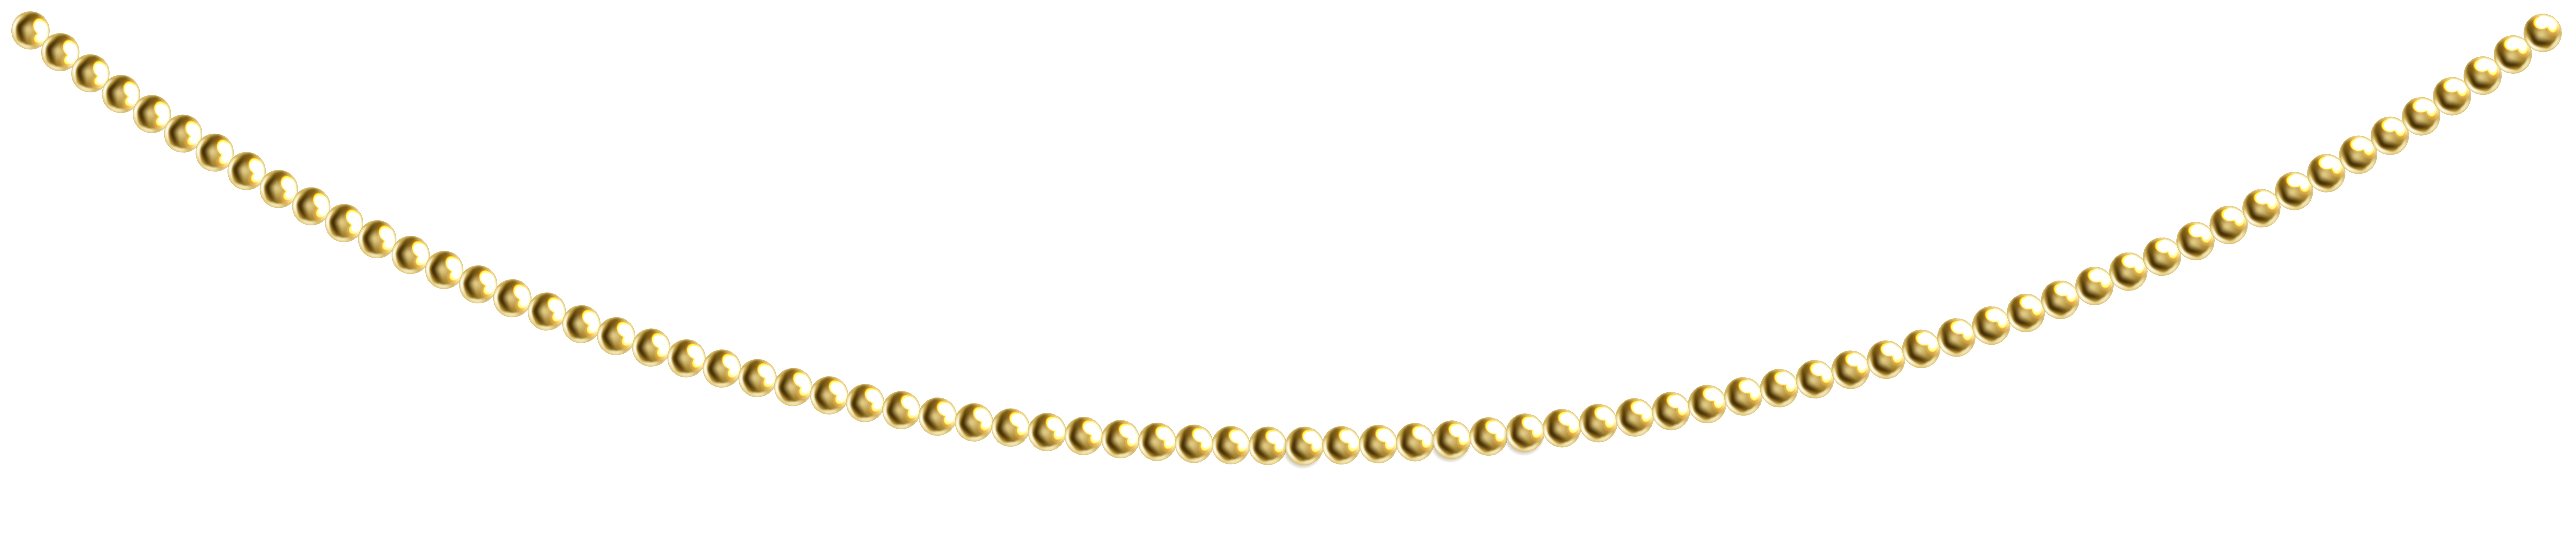 Gold Beads Decoration PNG Clip Art Image.